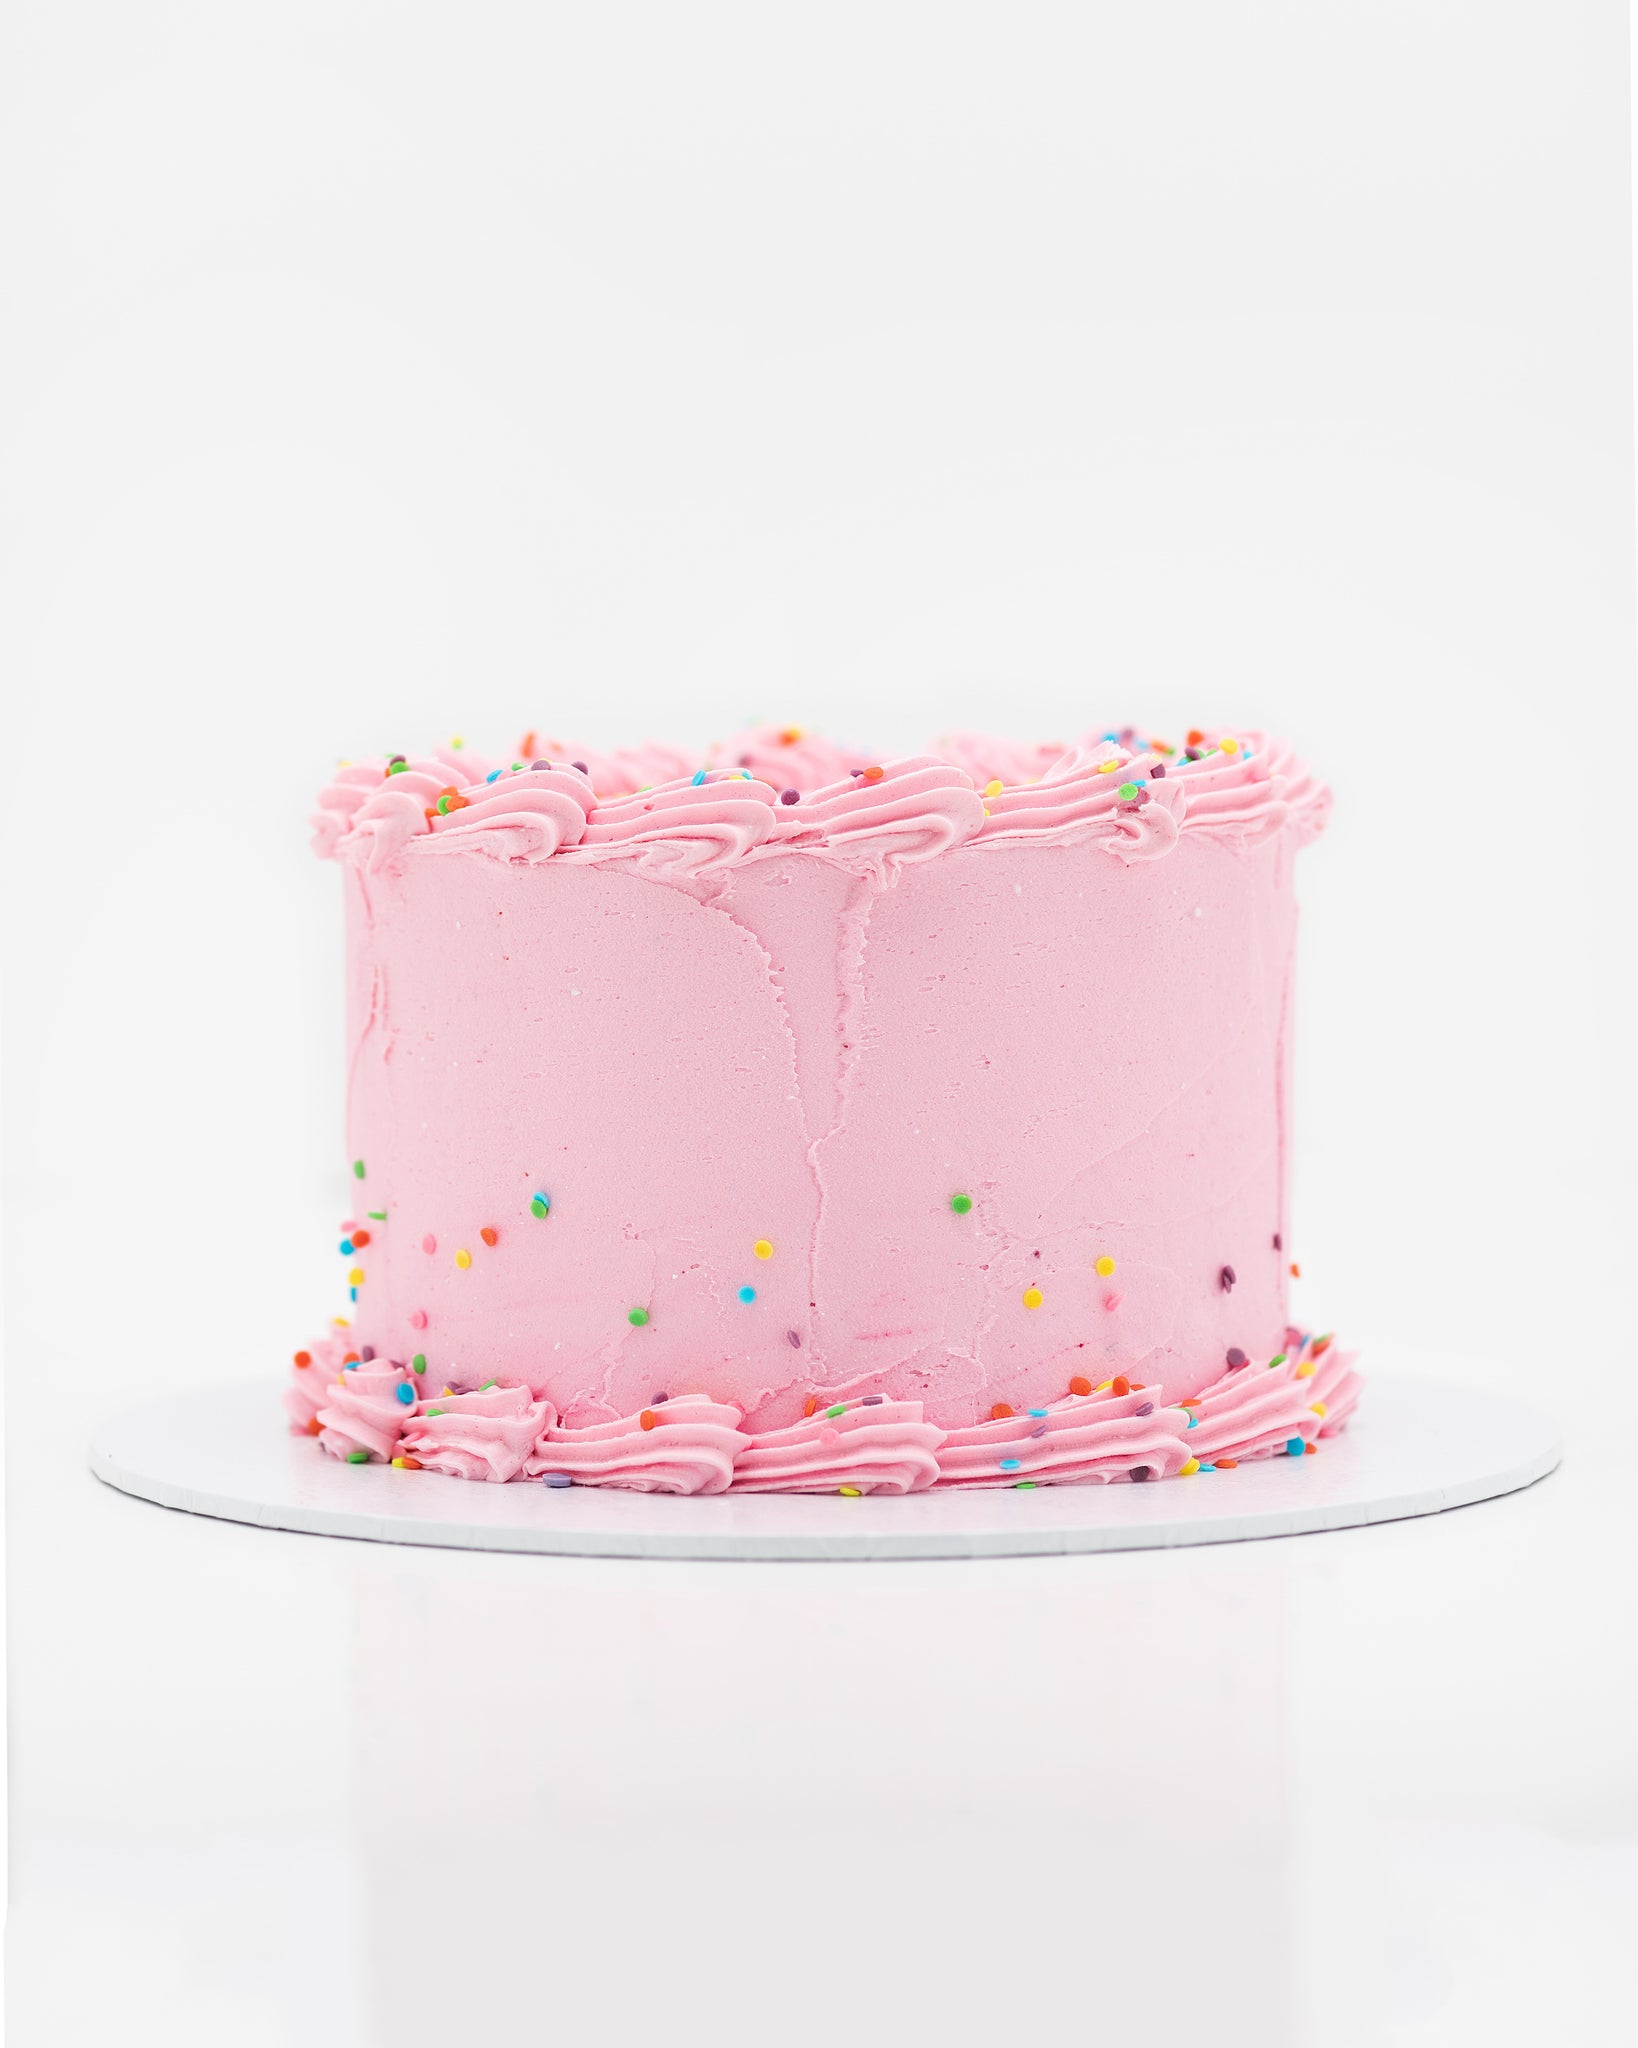 Birthday Cake with Hot Pink Butter Icing Recipe  Ina Garten  Food Network